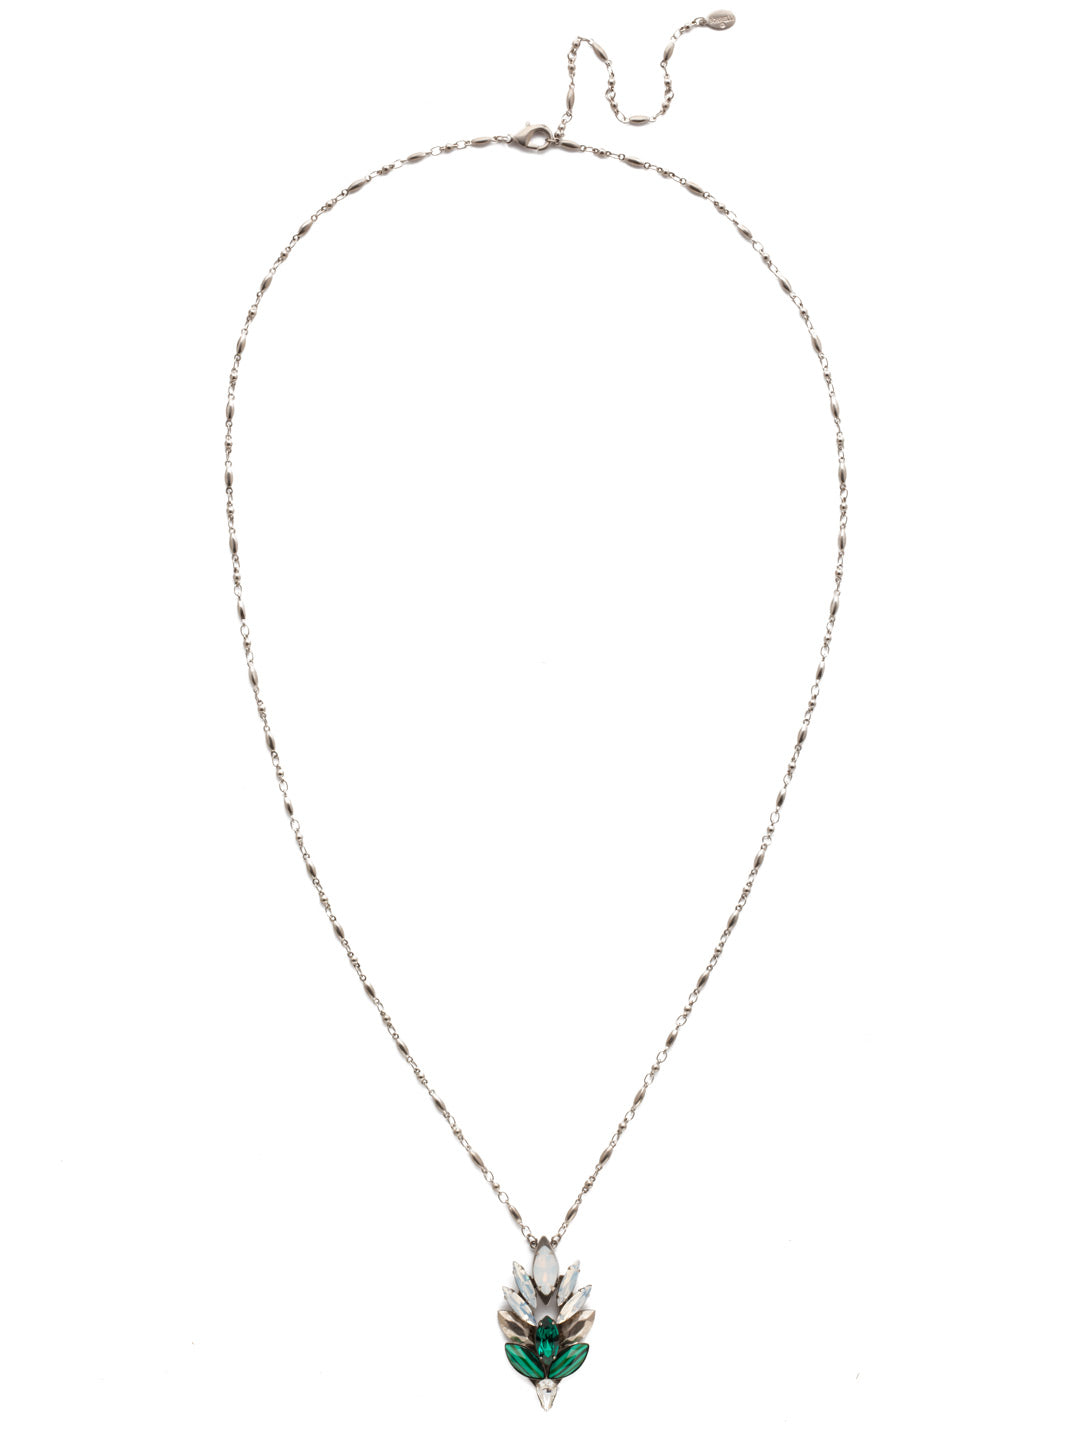 Emilia Pendant Necklace - NEF45ASSNM - A captivating pattern of crystals will be sure to draw attention to this dainty chain-link necklace. Perfect for mix and match layering make this necklace an easily transitional piece from day to night. From Sorrelli's Snowy Moss collection in our Antique Silver-tone finish.